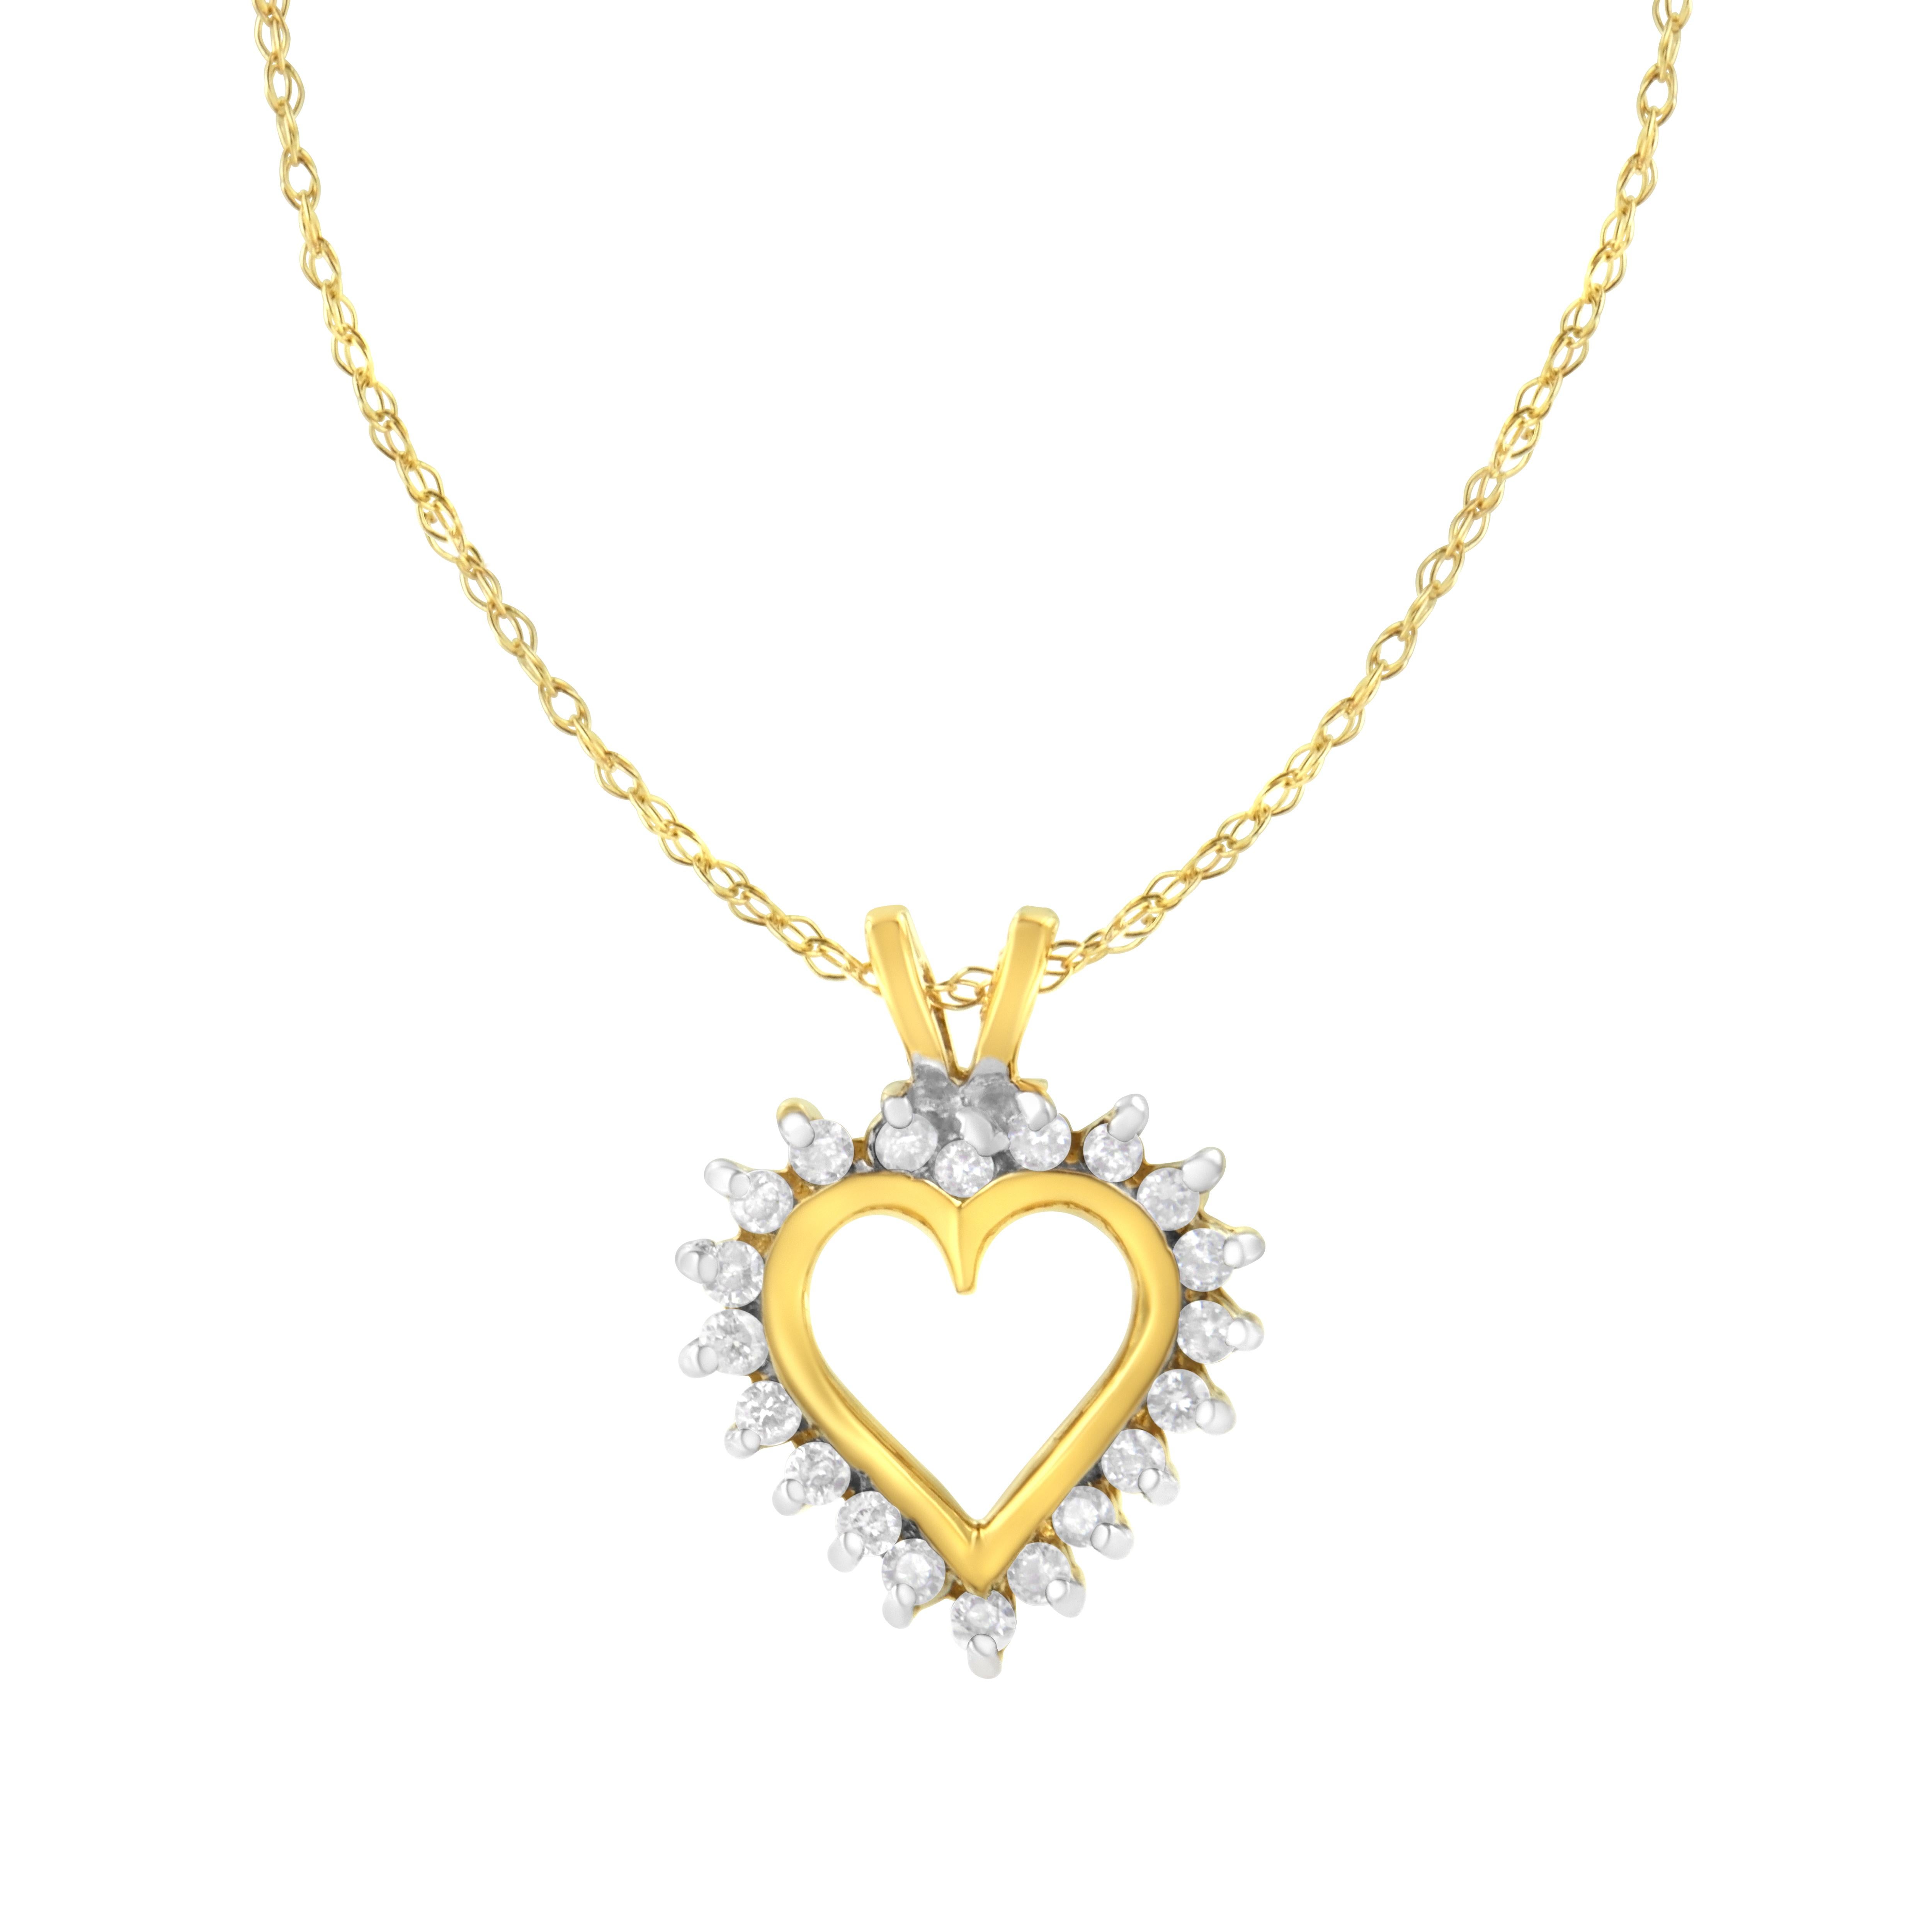 Envelop your love in this magnificent Open Heart Diamond Pendant. This icy fiery 10 karat yellow gold pendant is embellished with 20 glittering round cut diamonds in perfect prong setting and dangles from an elegant rope chain. Total diamond weight